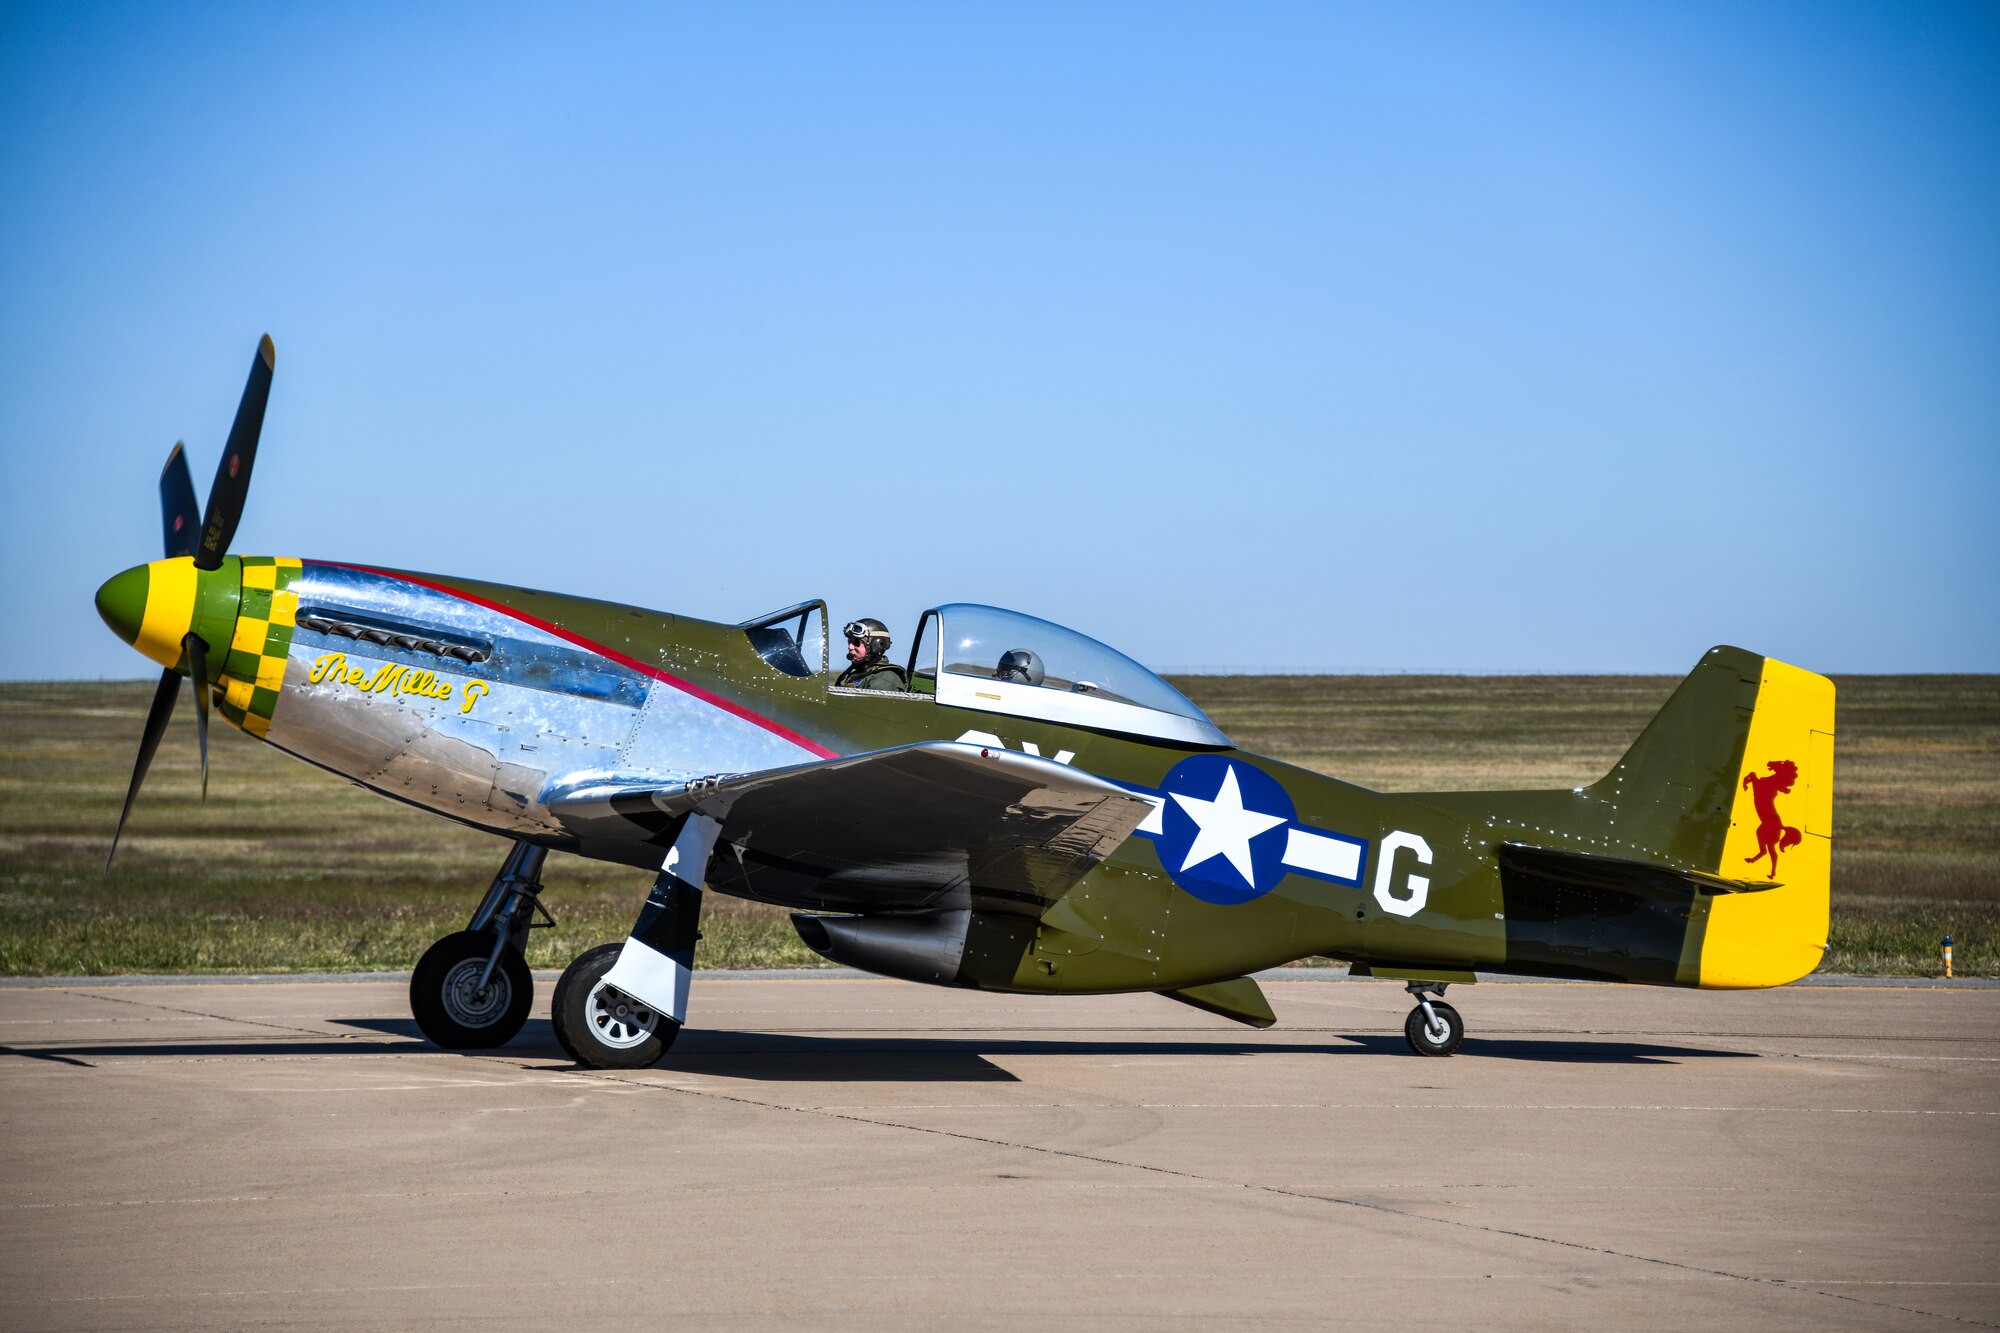 A P-51 Mustang taxiing